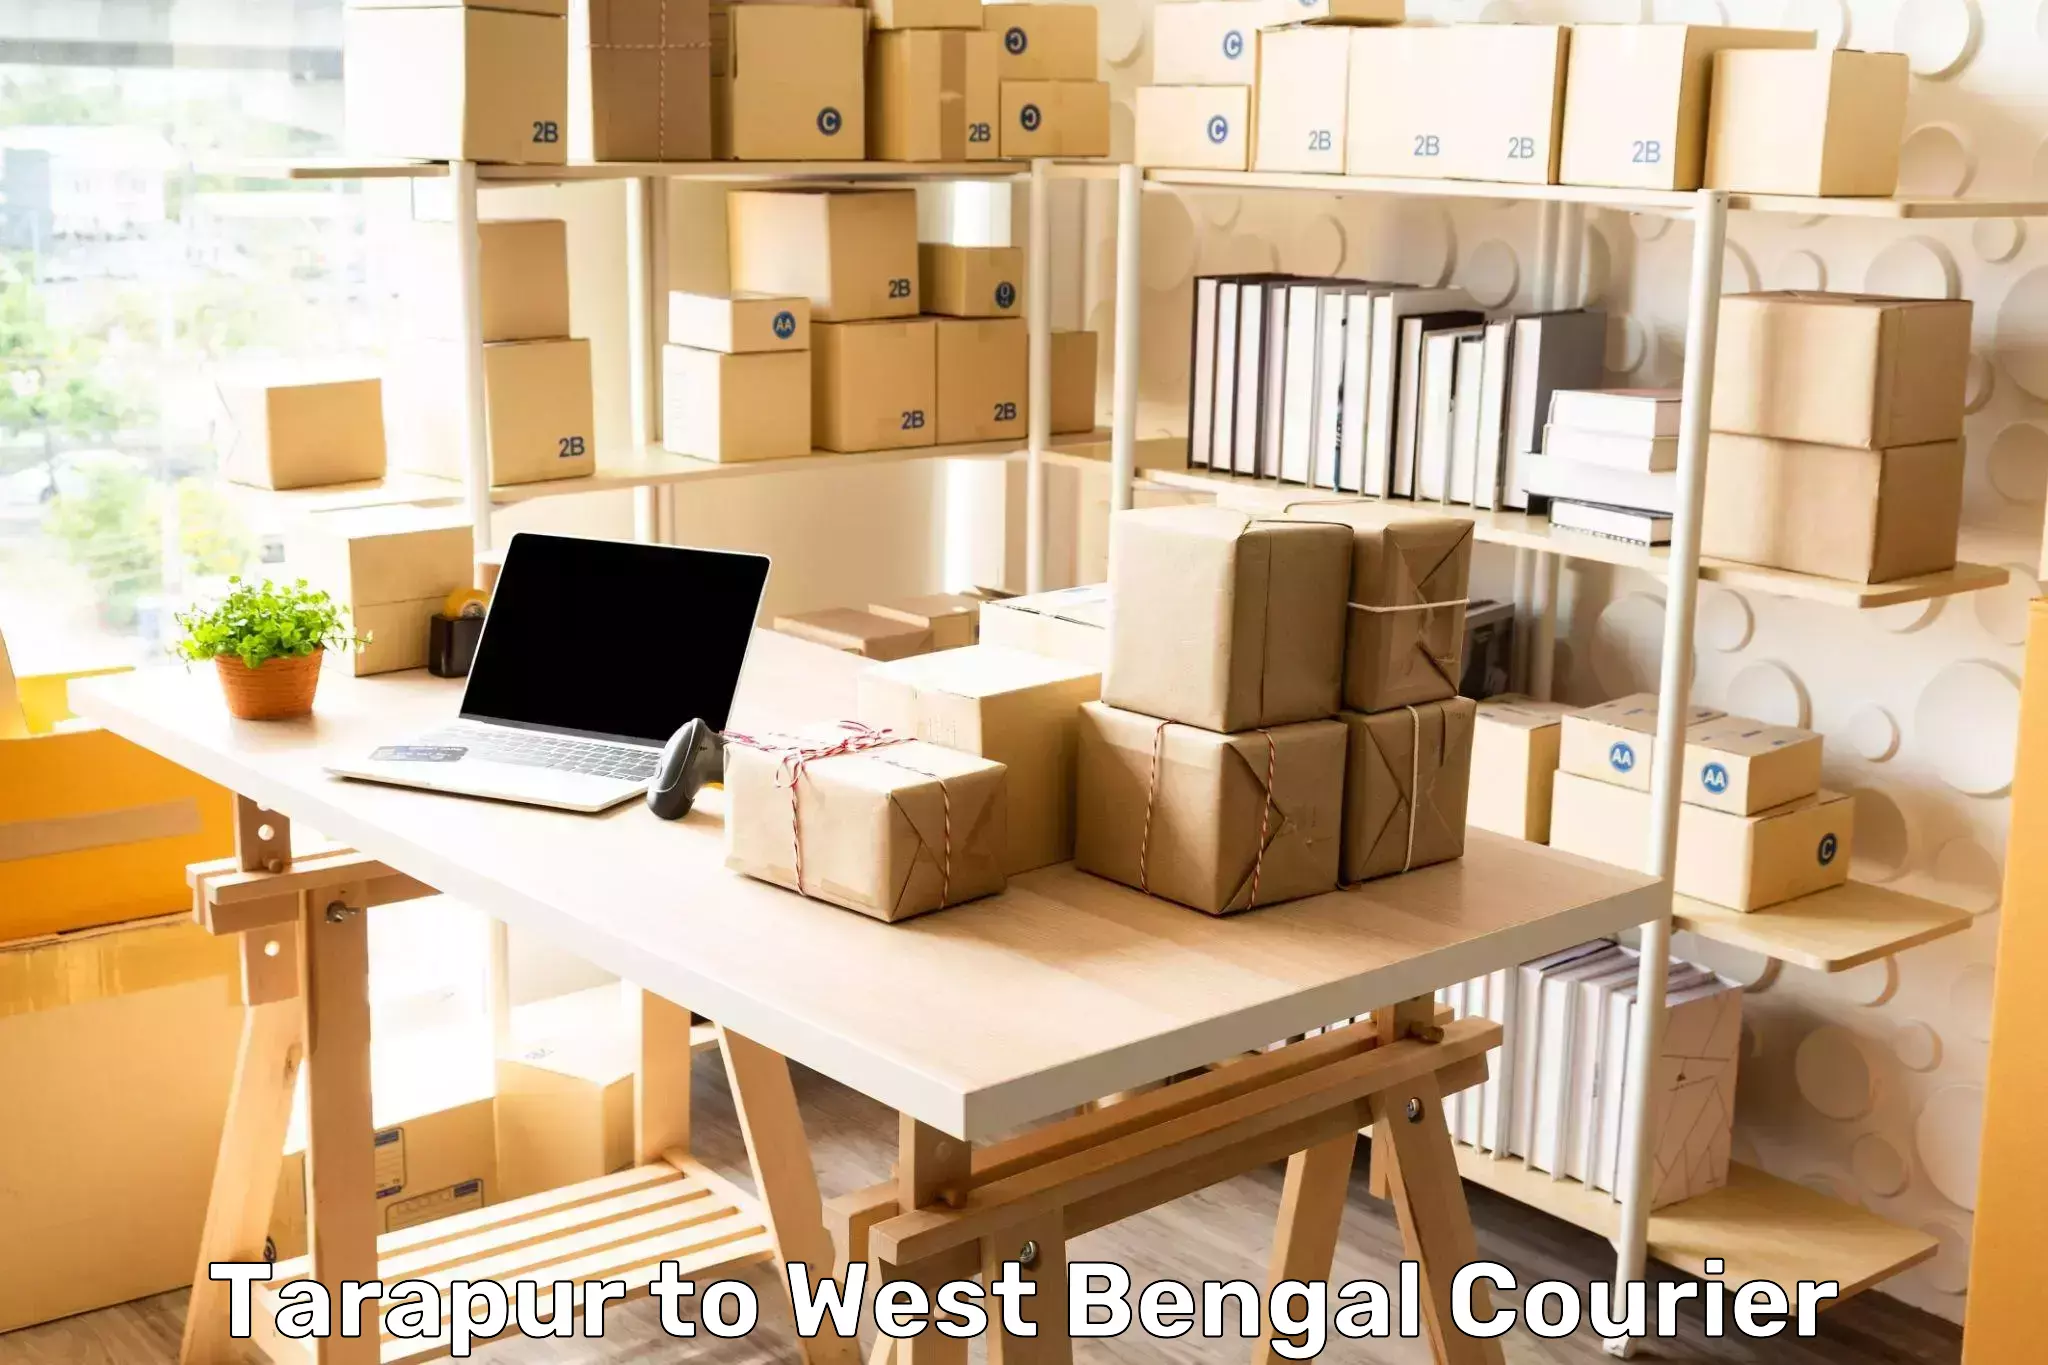 Multi-service courier options Tarapur to West Bengal